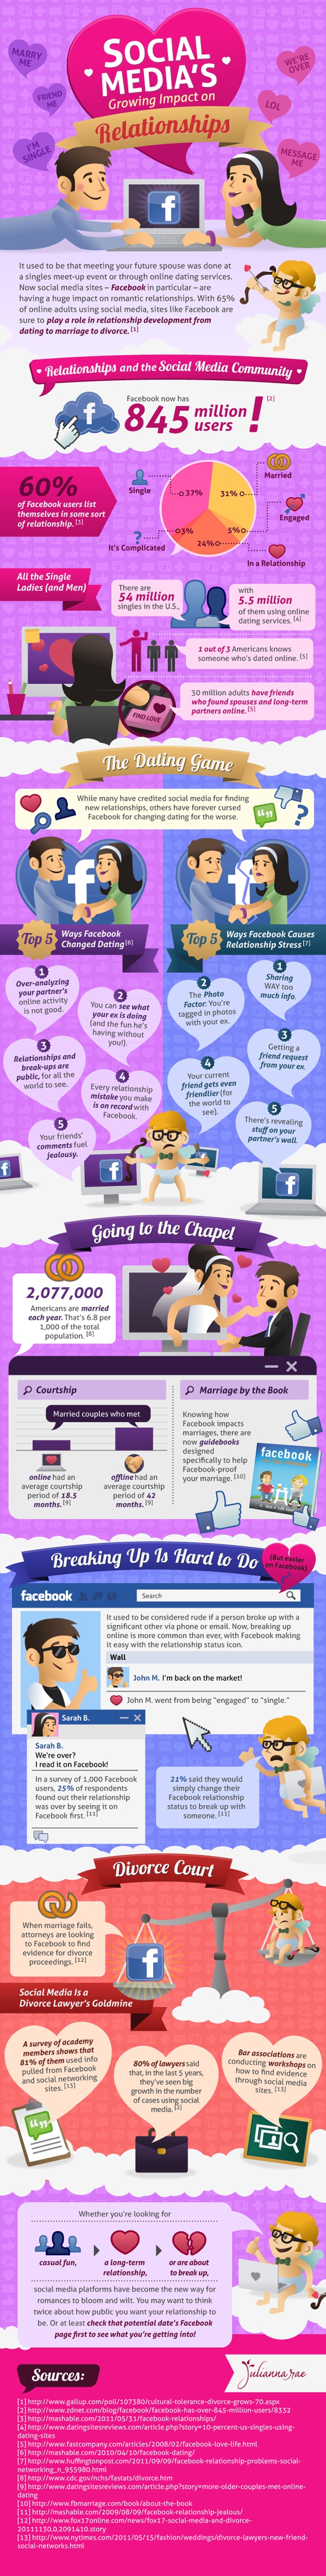 Social Media’s Effect On Romantic Relationships [Infographic]